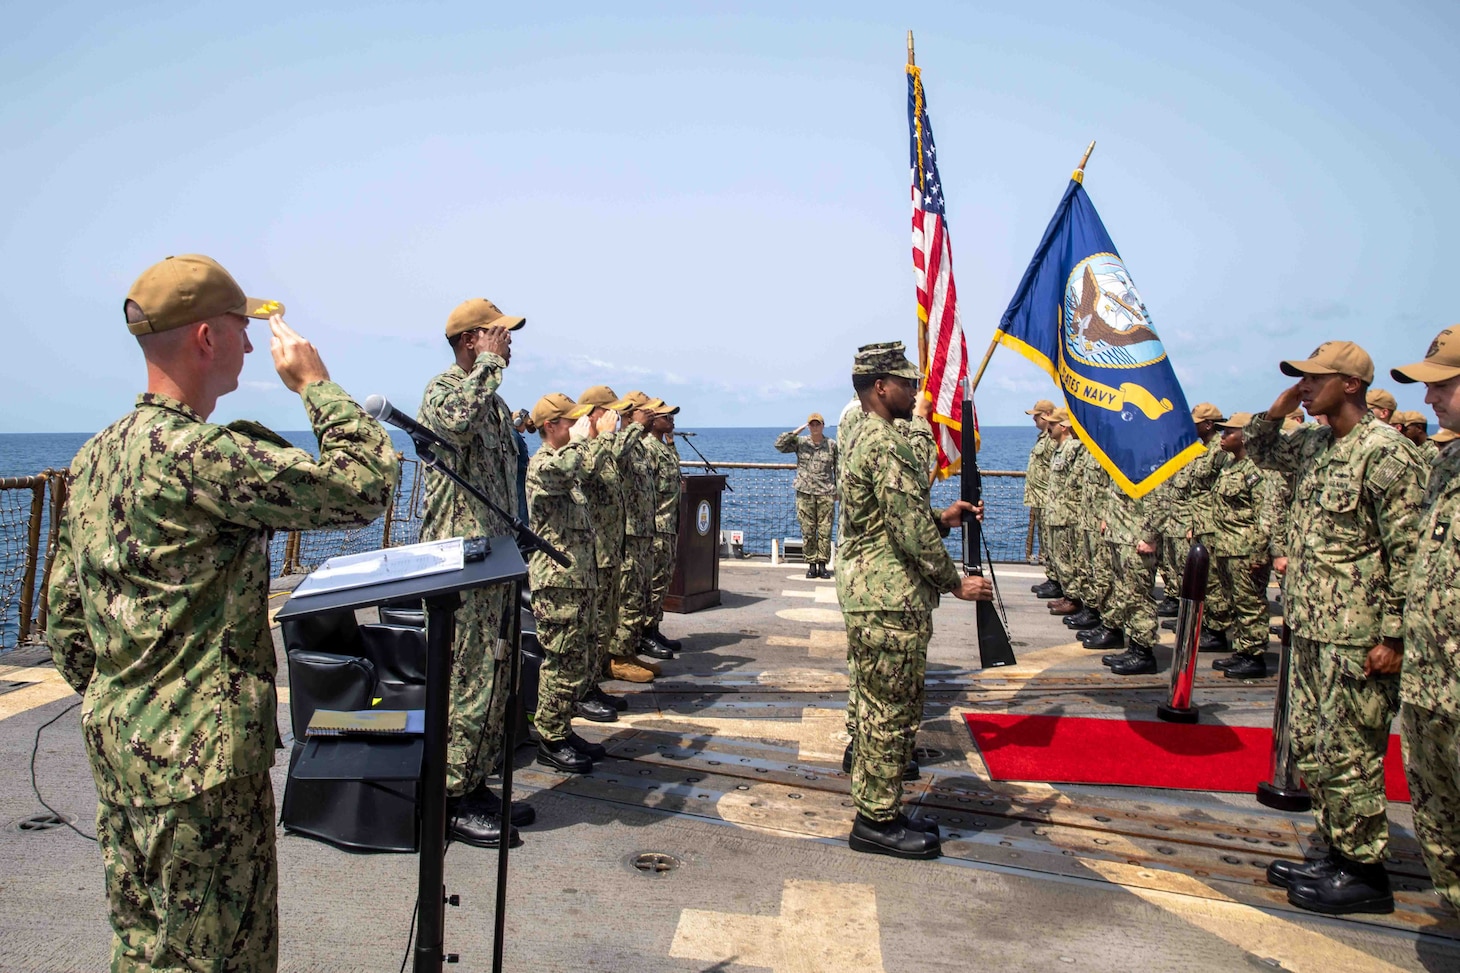 Sailors render honors during the national anthem during a change of command ceremony aboard the guided-missile destroyer USS Nitze (DDG 94) in the Gulf of Aden, Sept. 28. USS Nitze is deployed to the U.S. 5th Fleet area of operations to help ensure maritime security and stability in the Middle East region.